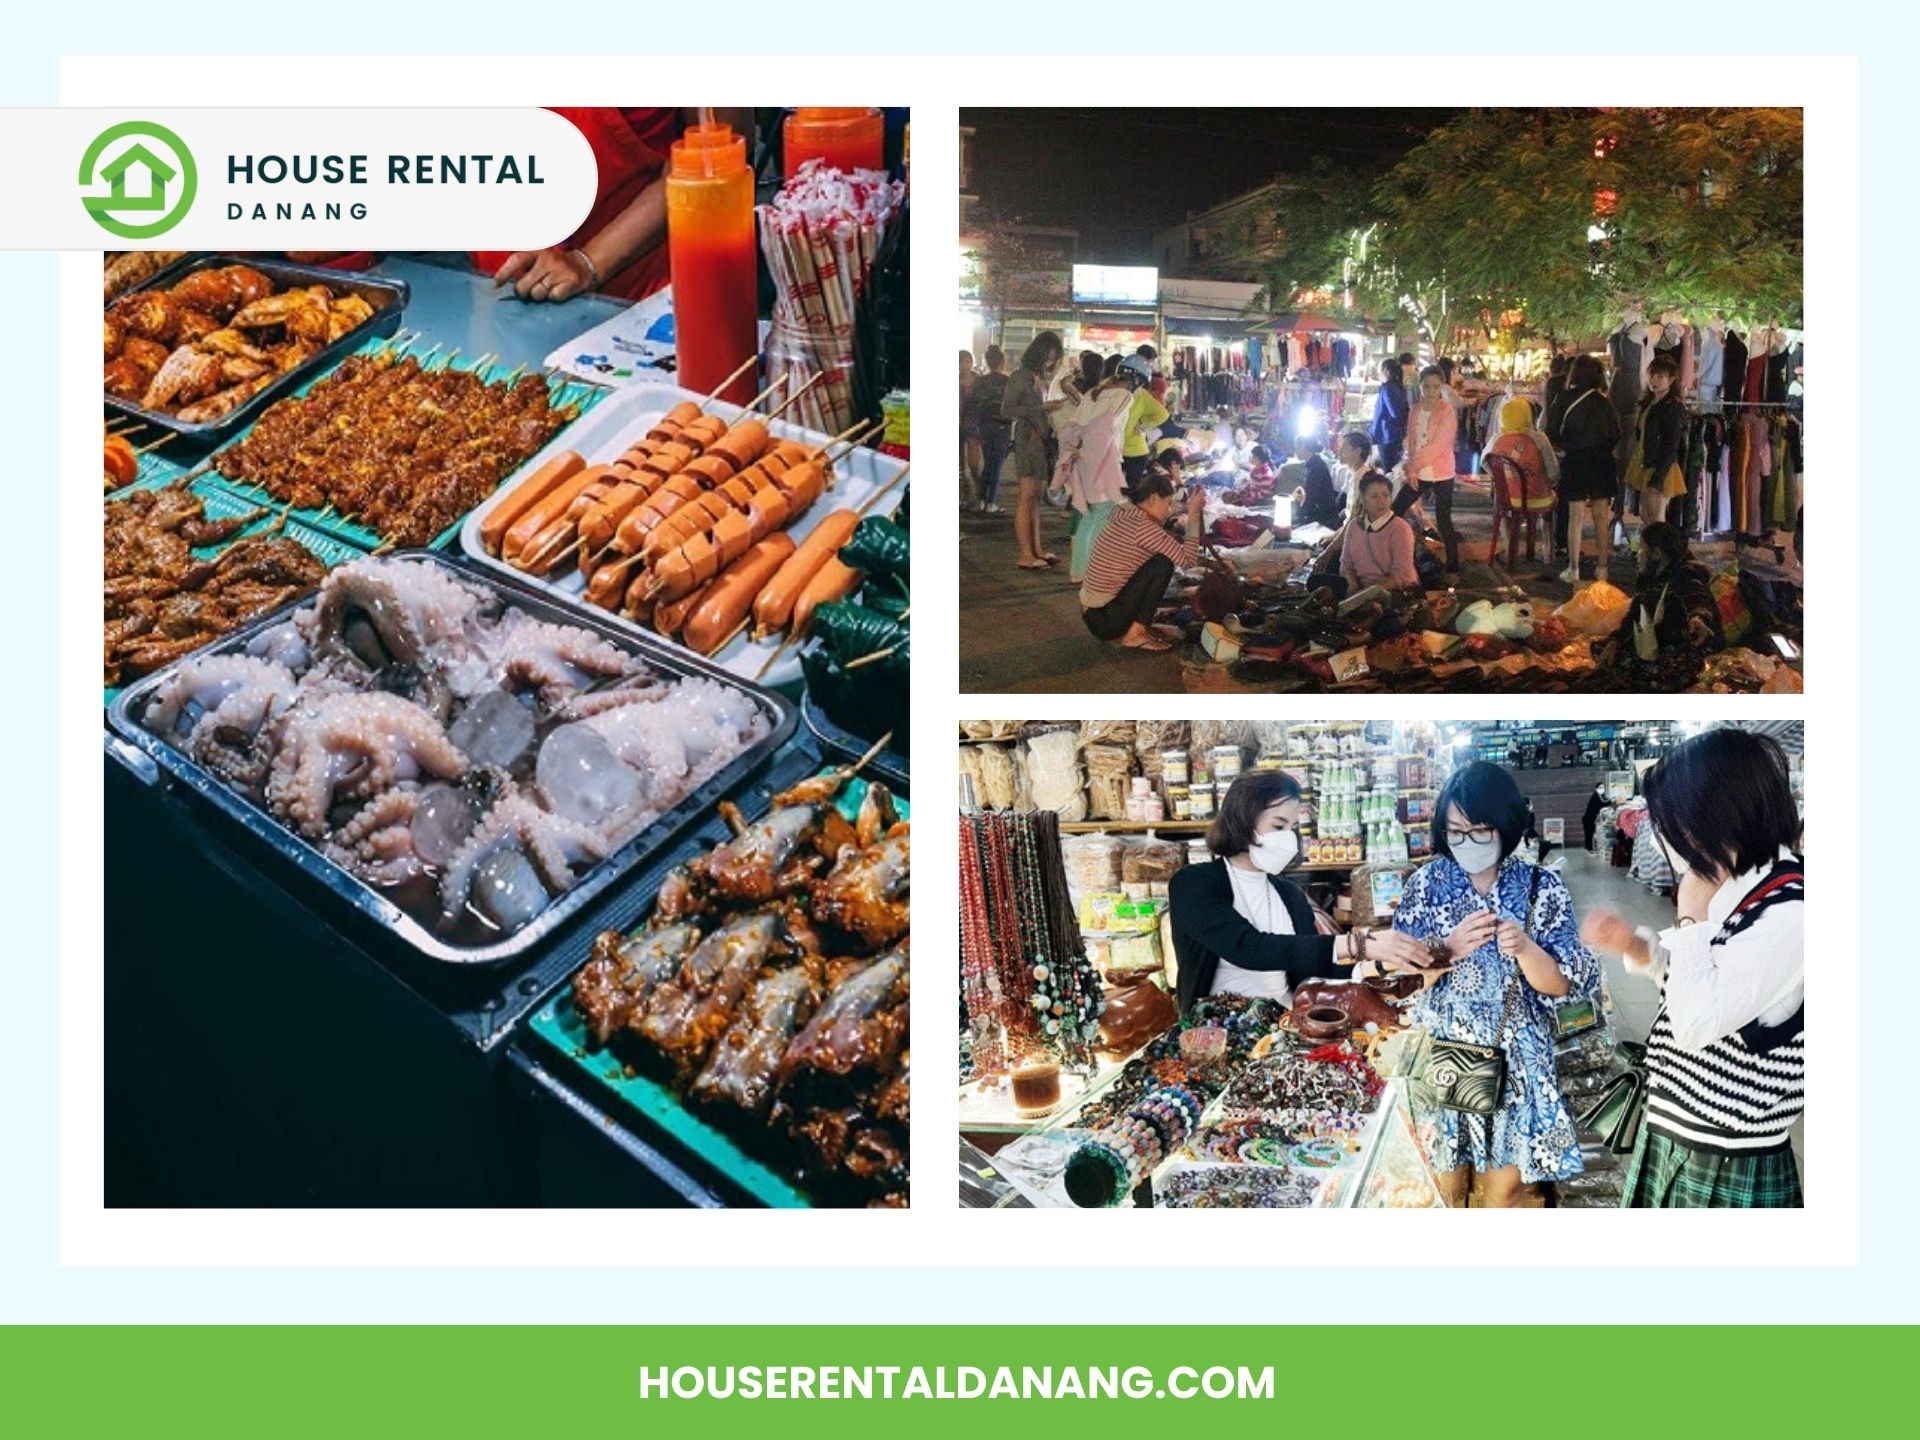 A collage showcasing street food like seafood and sausages, a bustling night market in Danang, and people shopping for jewelry and accessories. The image includes the branding for House Rental Danang.